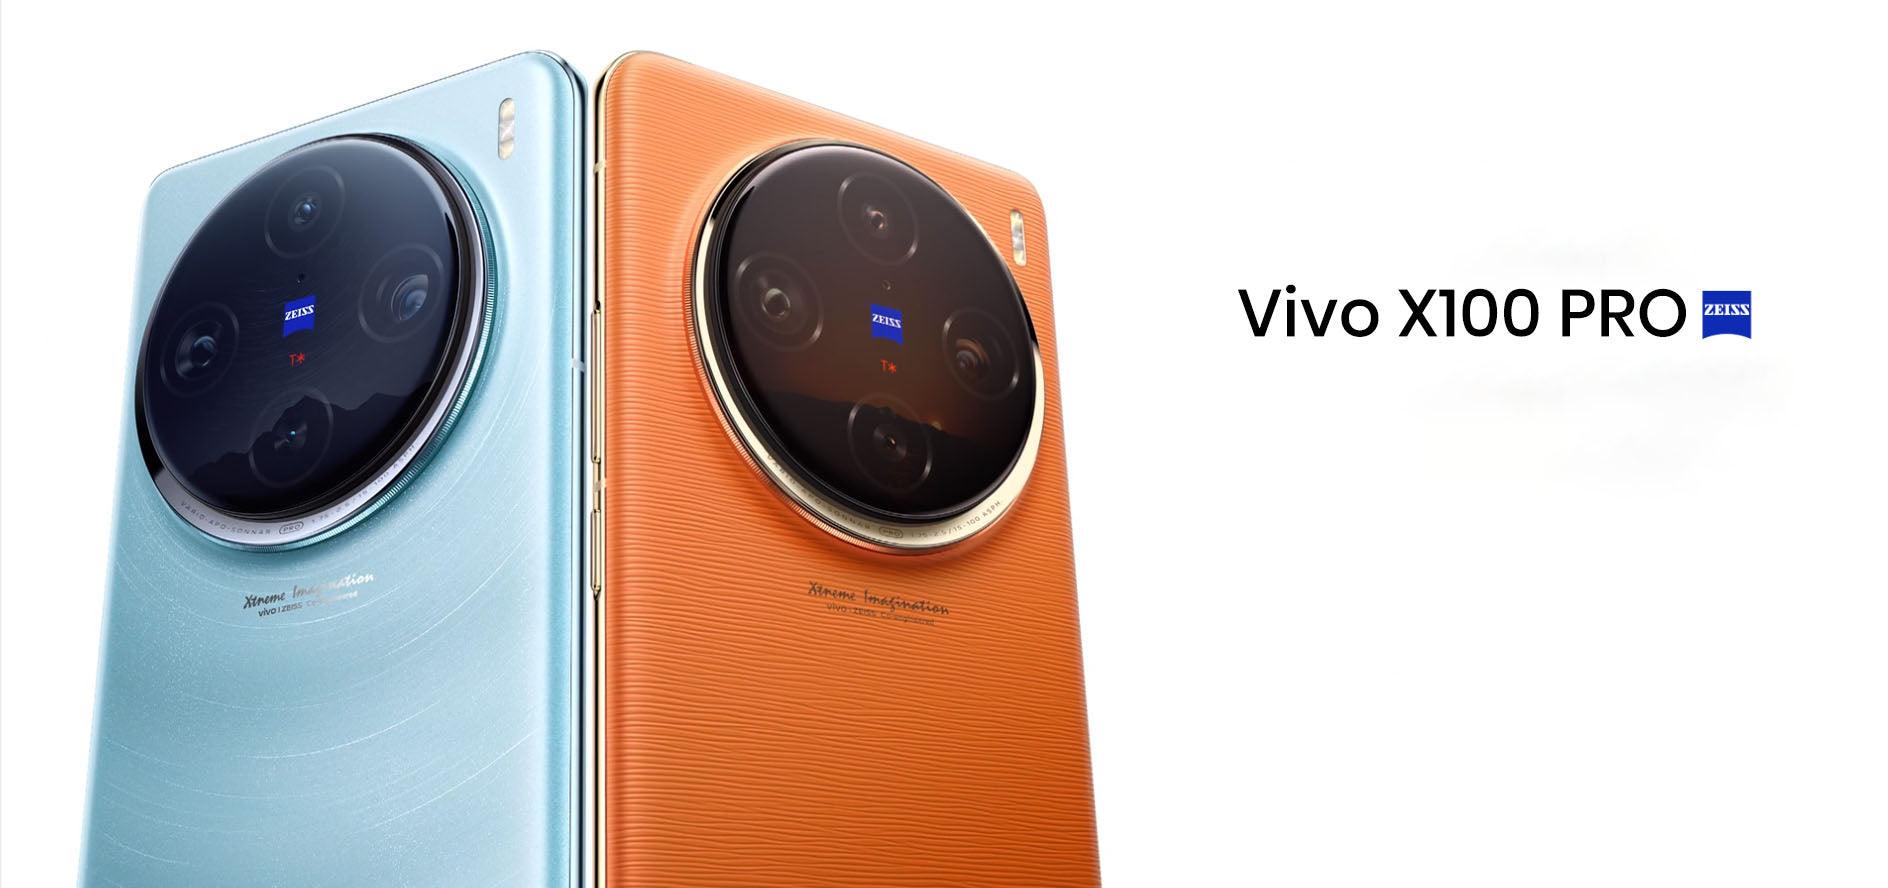 Vivo X100 Pro 4K smartphone is coming to Europe - Videomaker